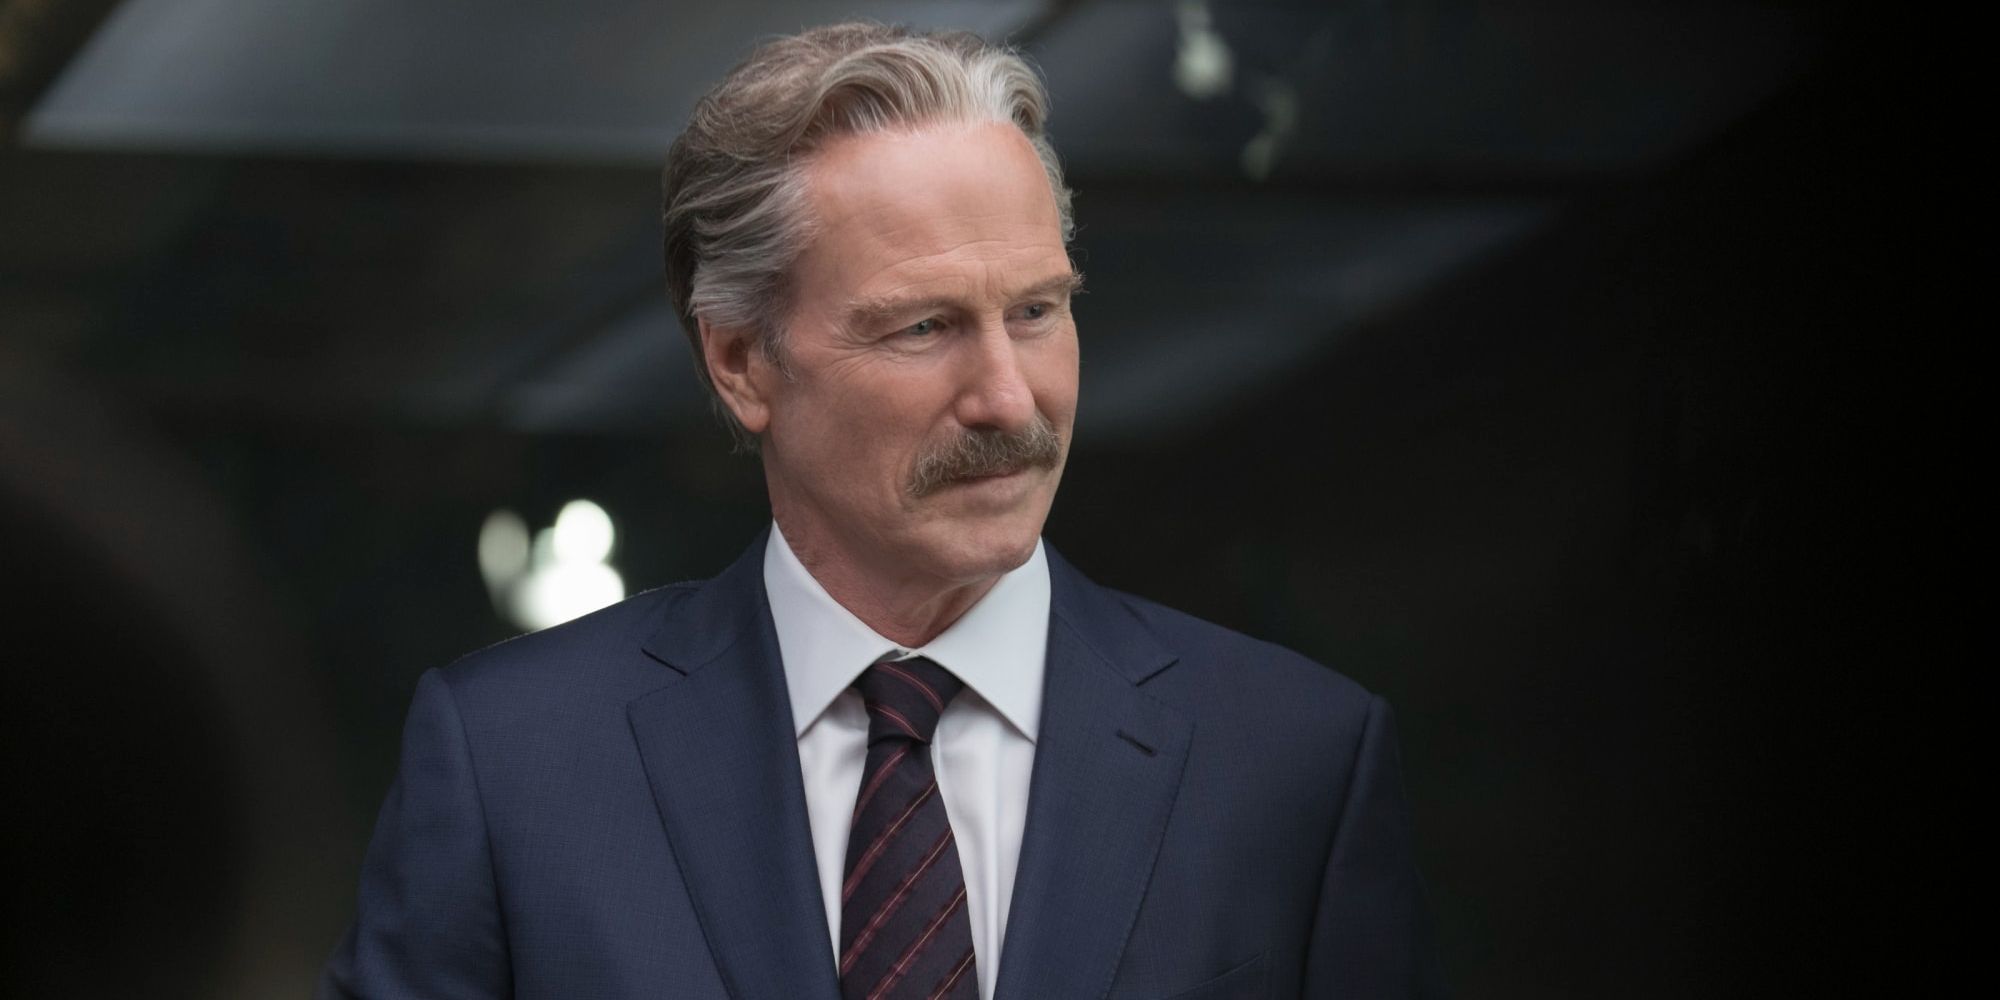 William Hurt appearing as Thaddeus "Thunderbolt" Ross in the MCU